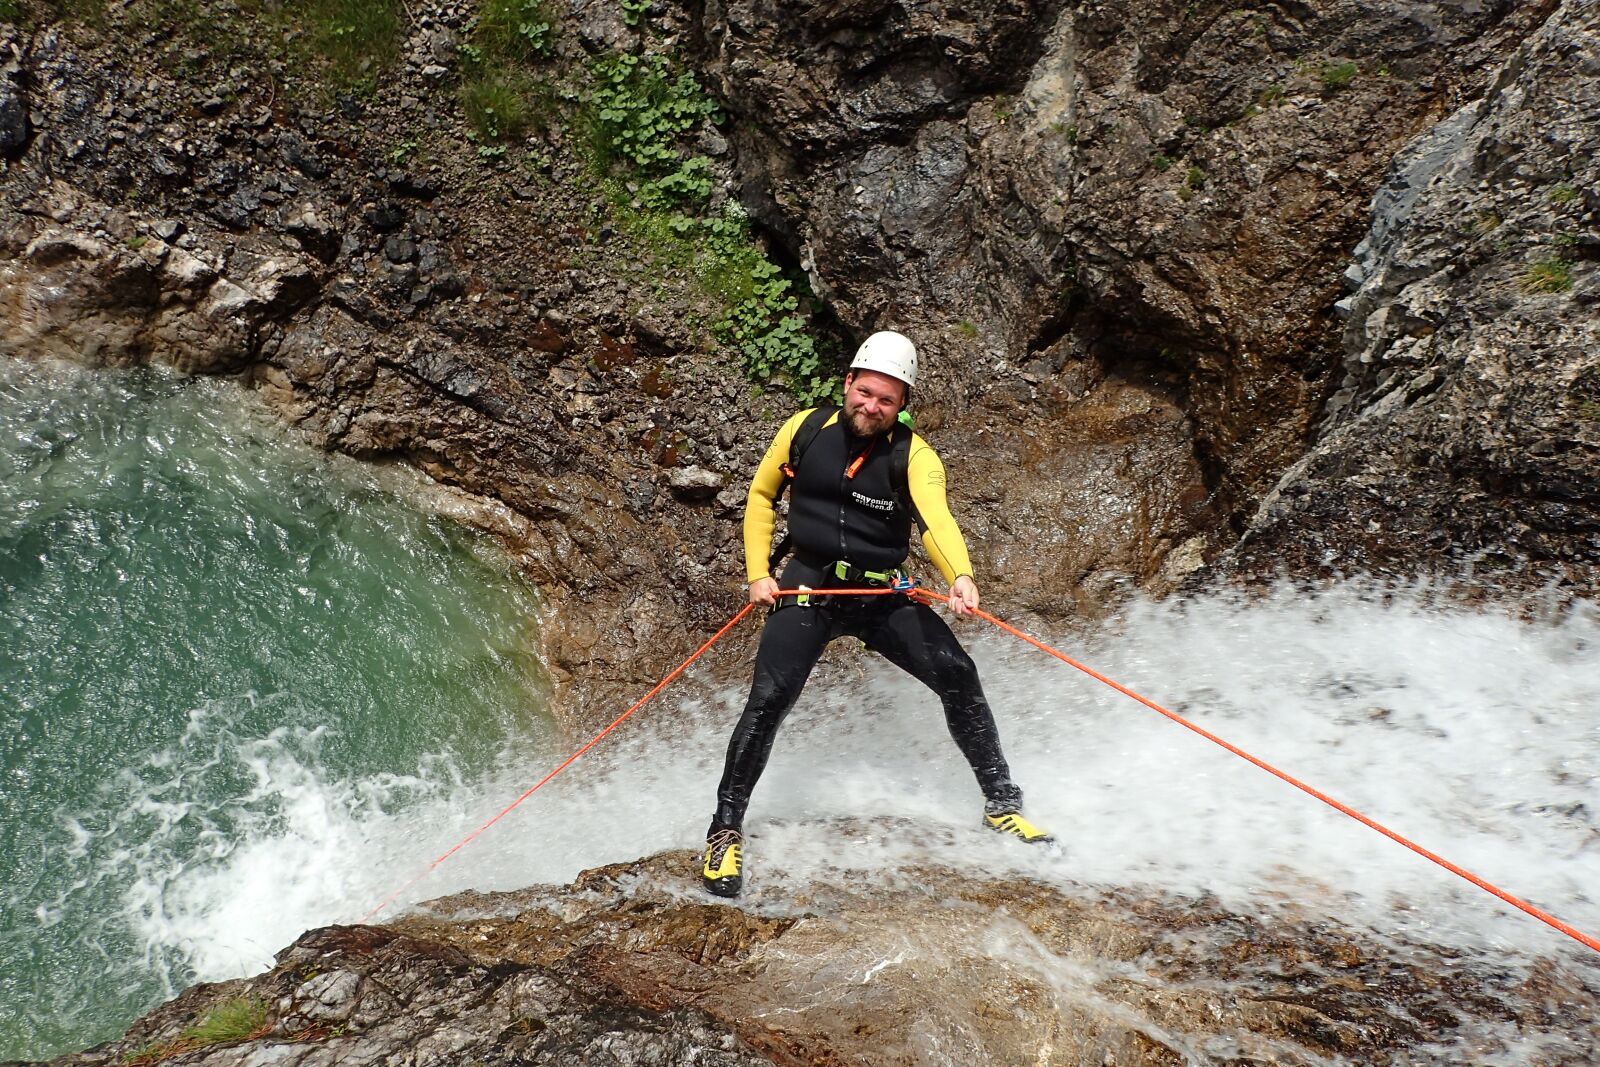 Olympus TG-4 sample photo. Waterfall, canyoning, abseil photography